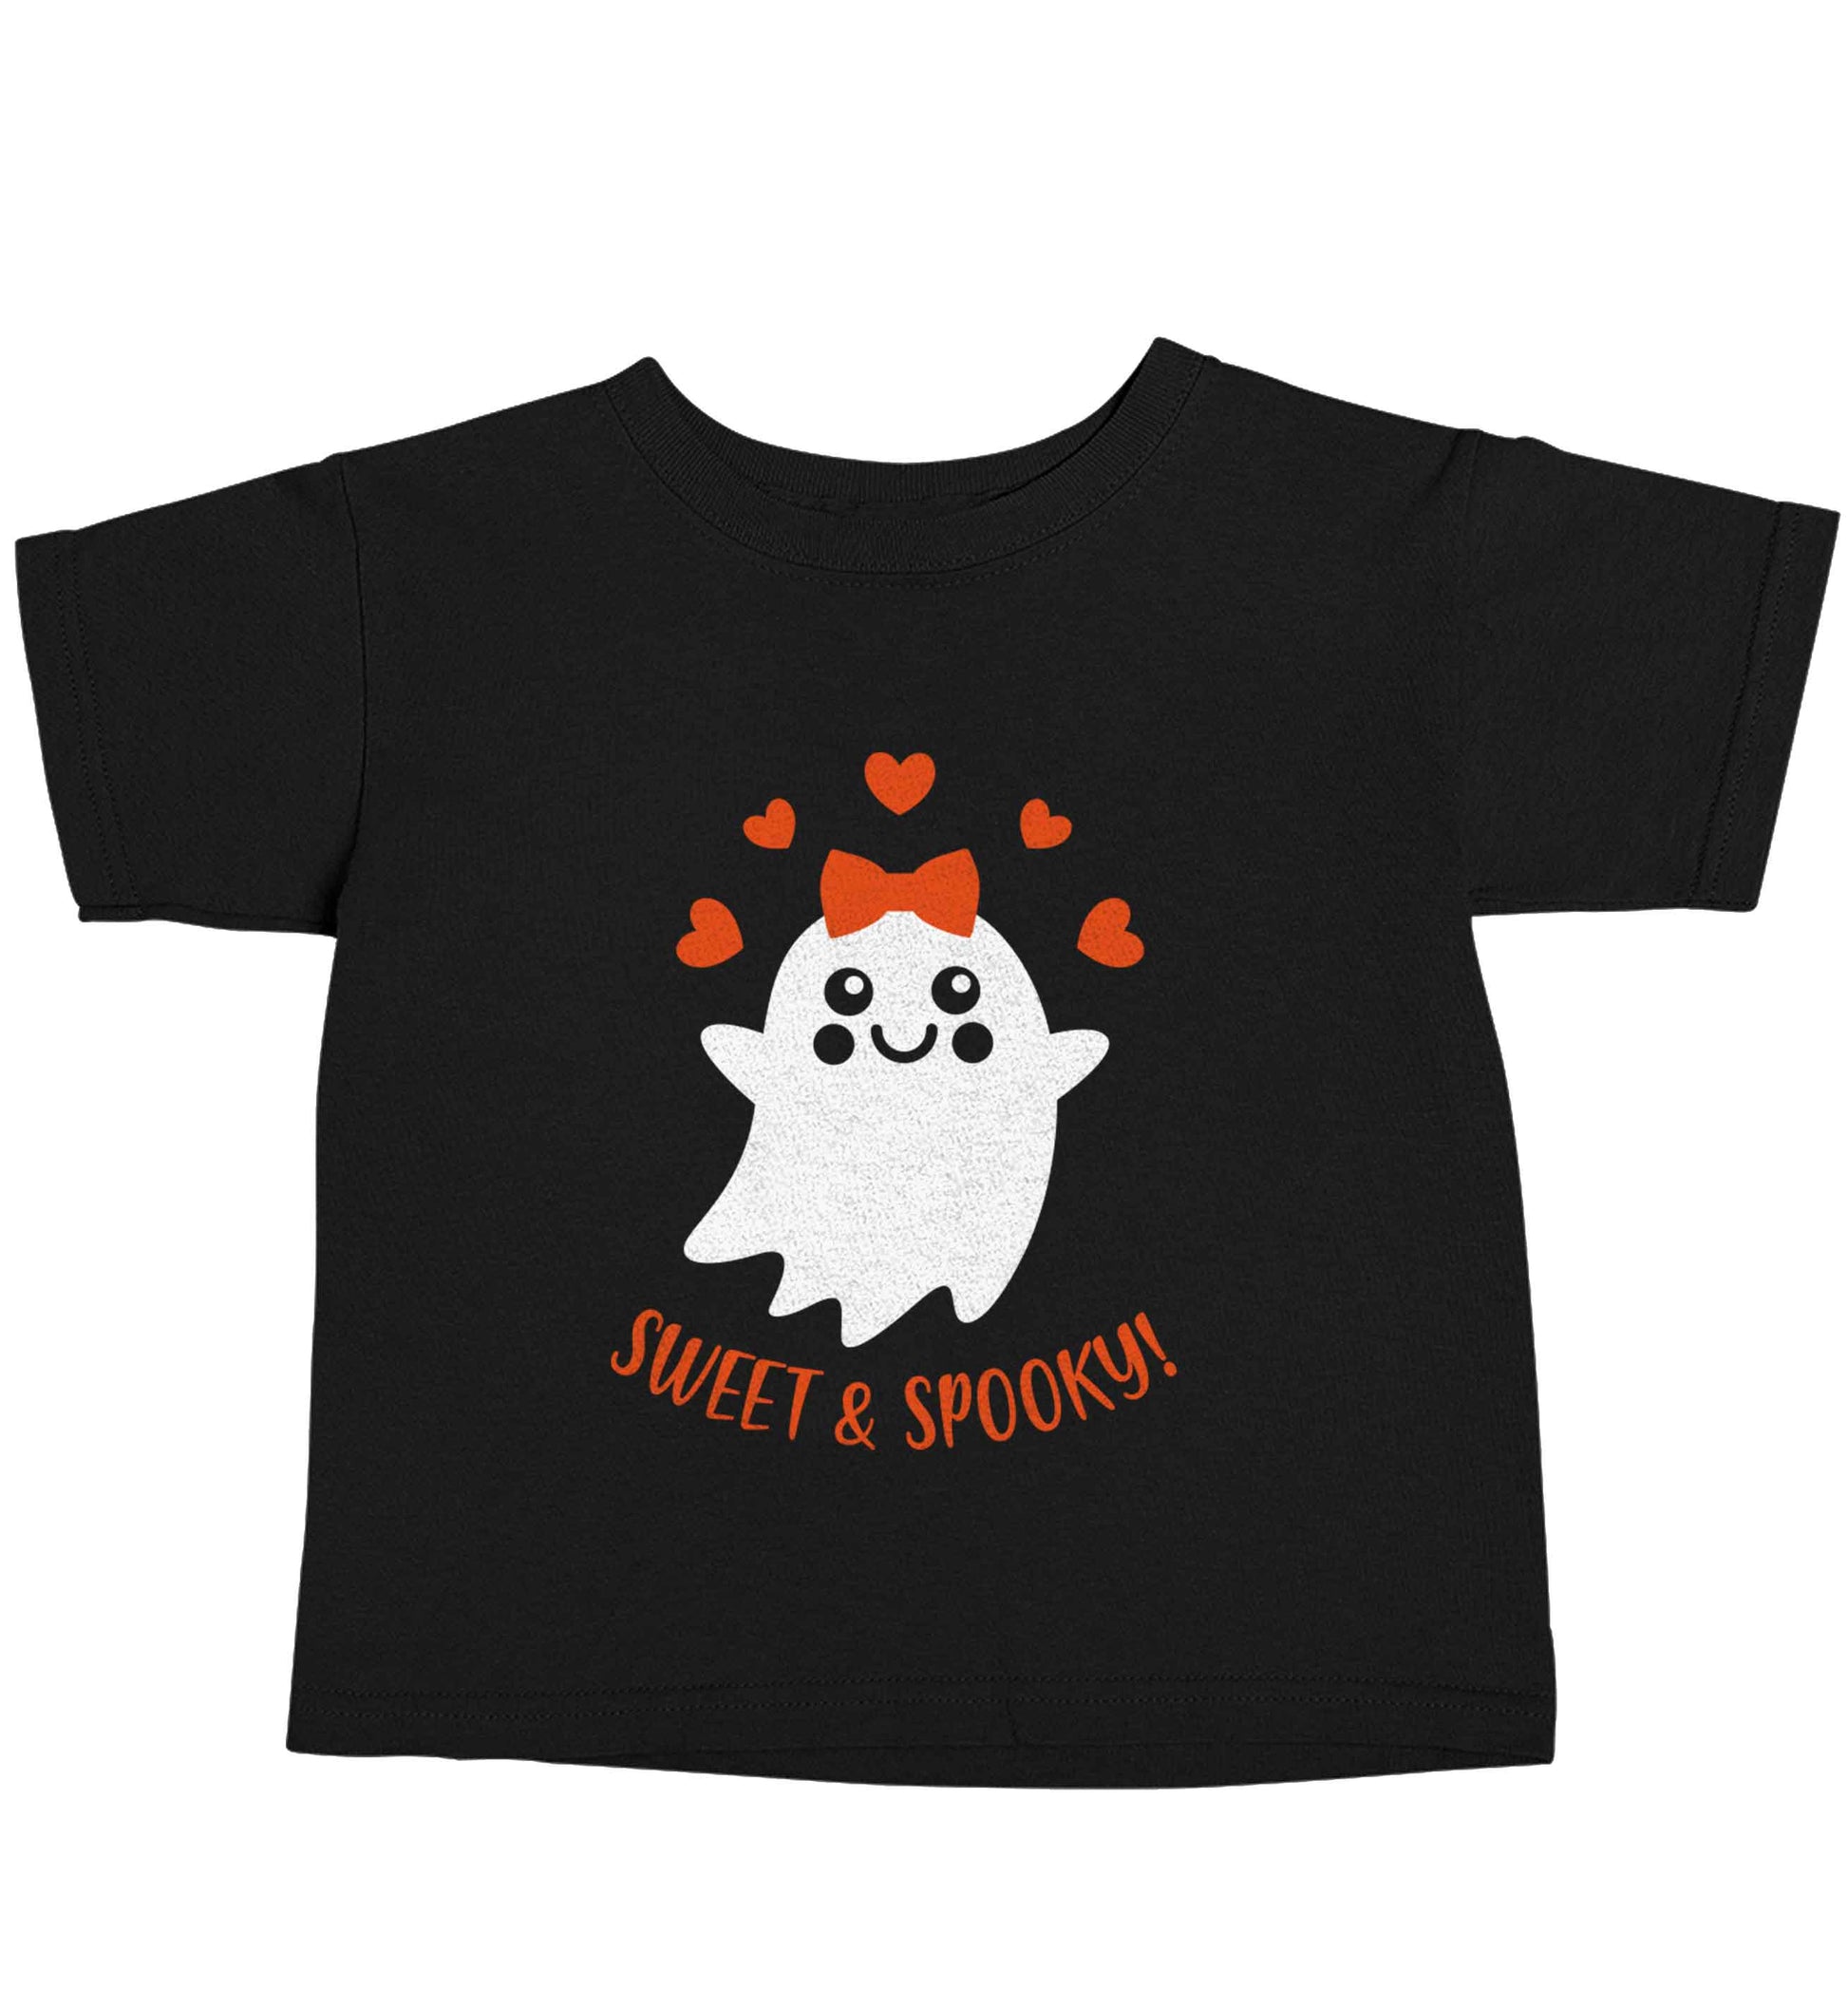 Sweet and spooky Black baby toddler Tshirt 2 years